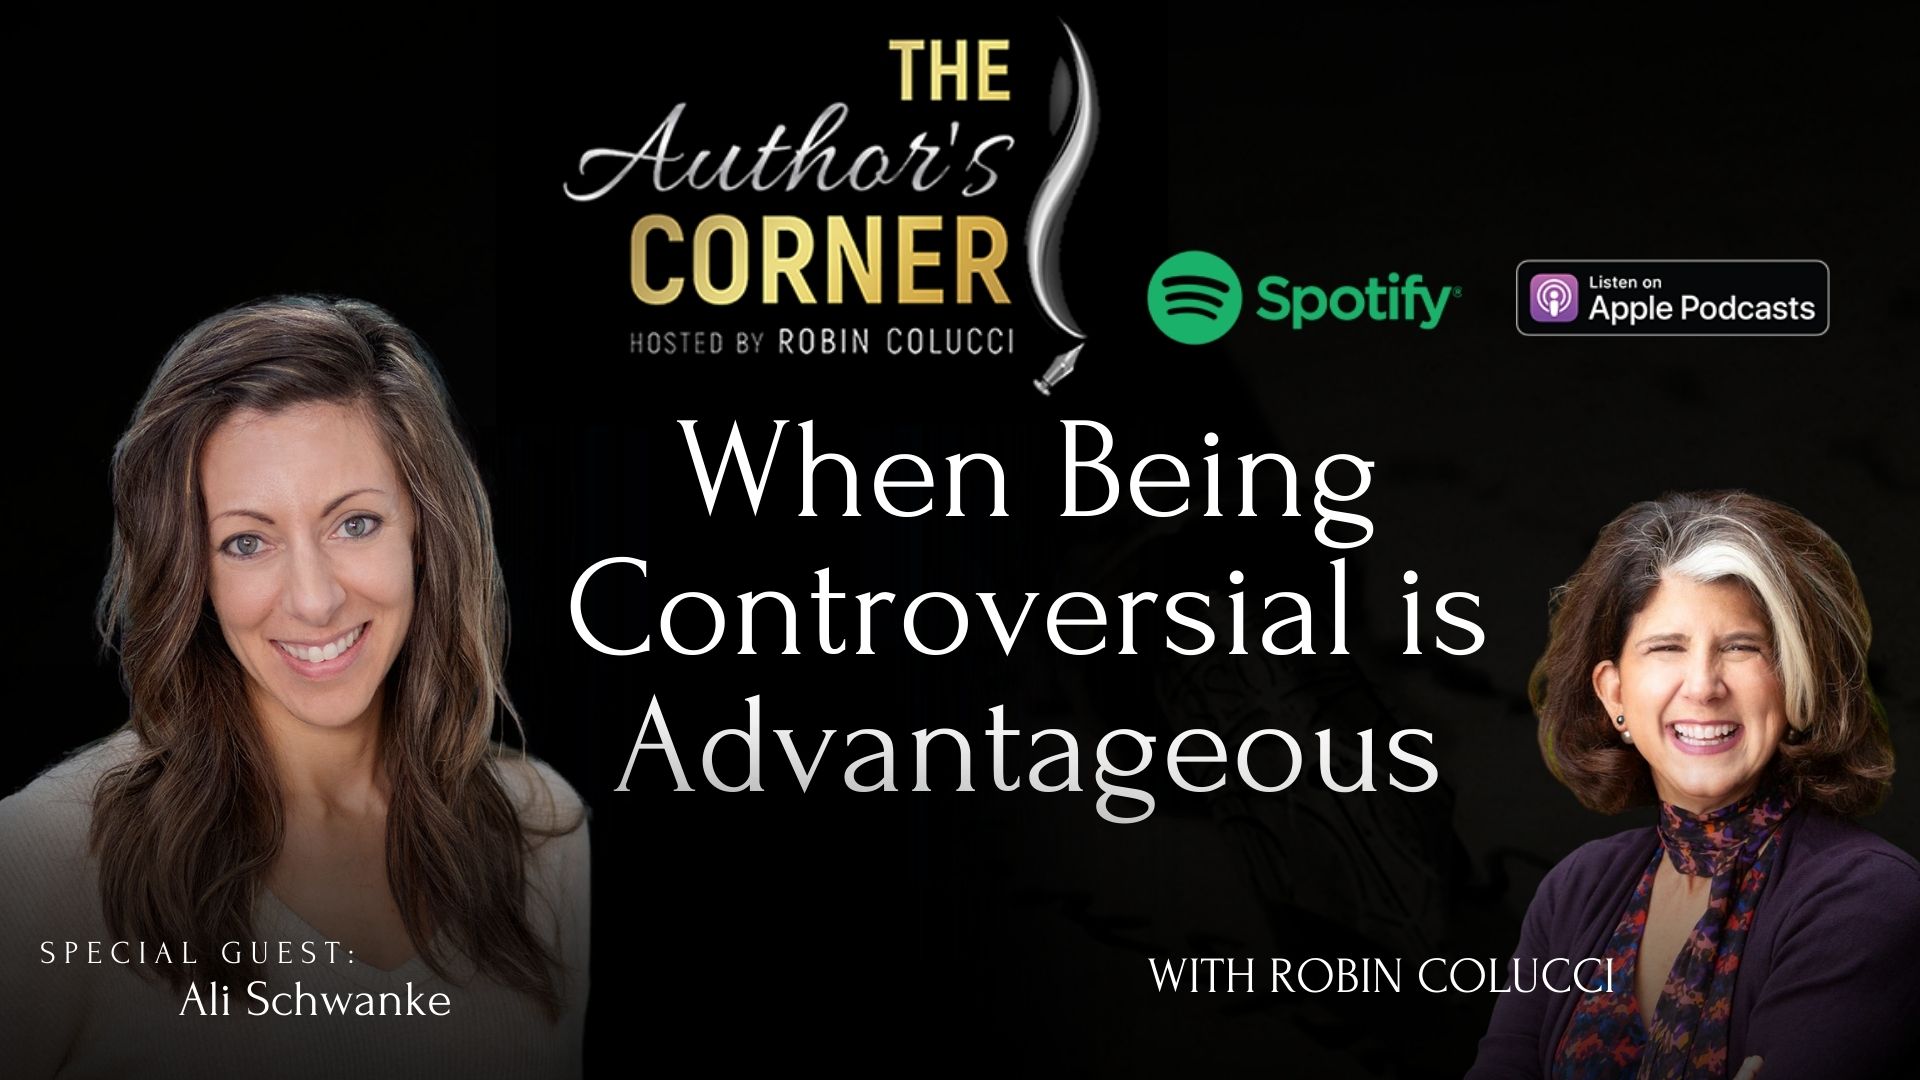 Ali Schwanke guest podcast interview on the Author's Corner